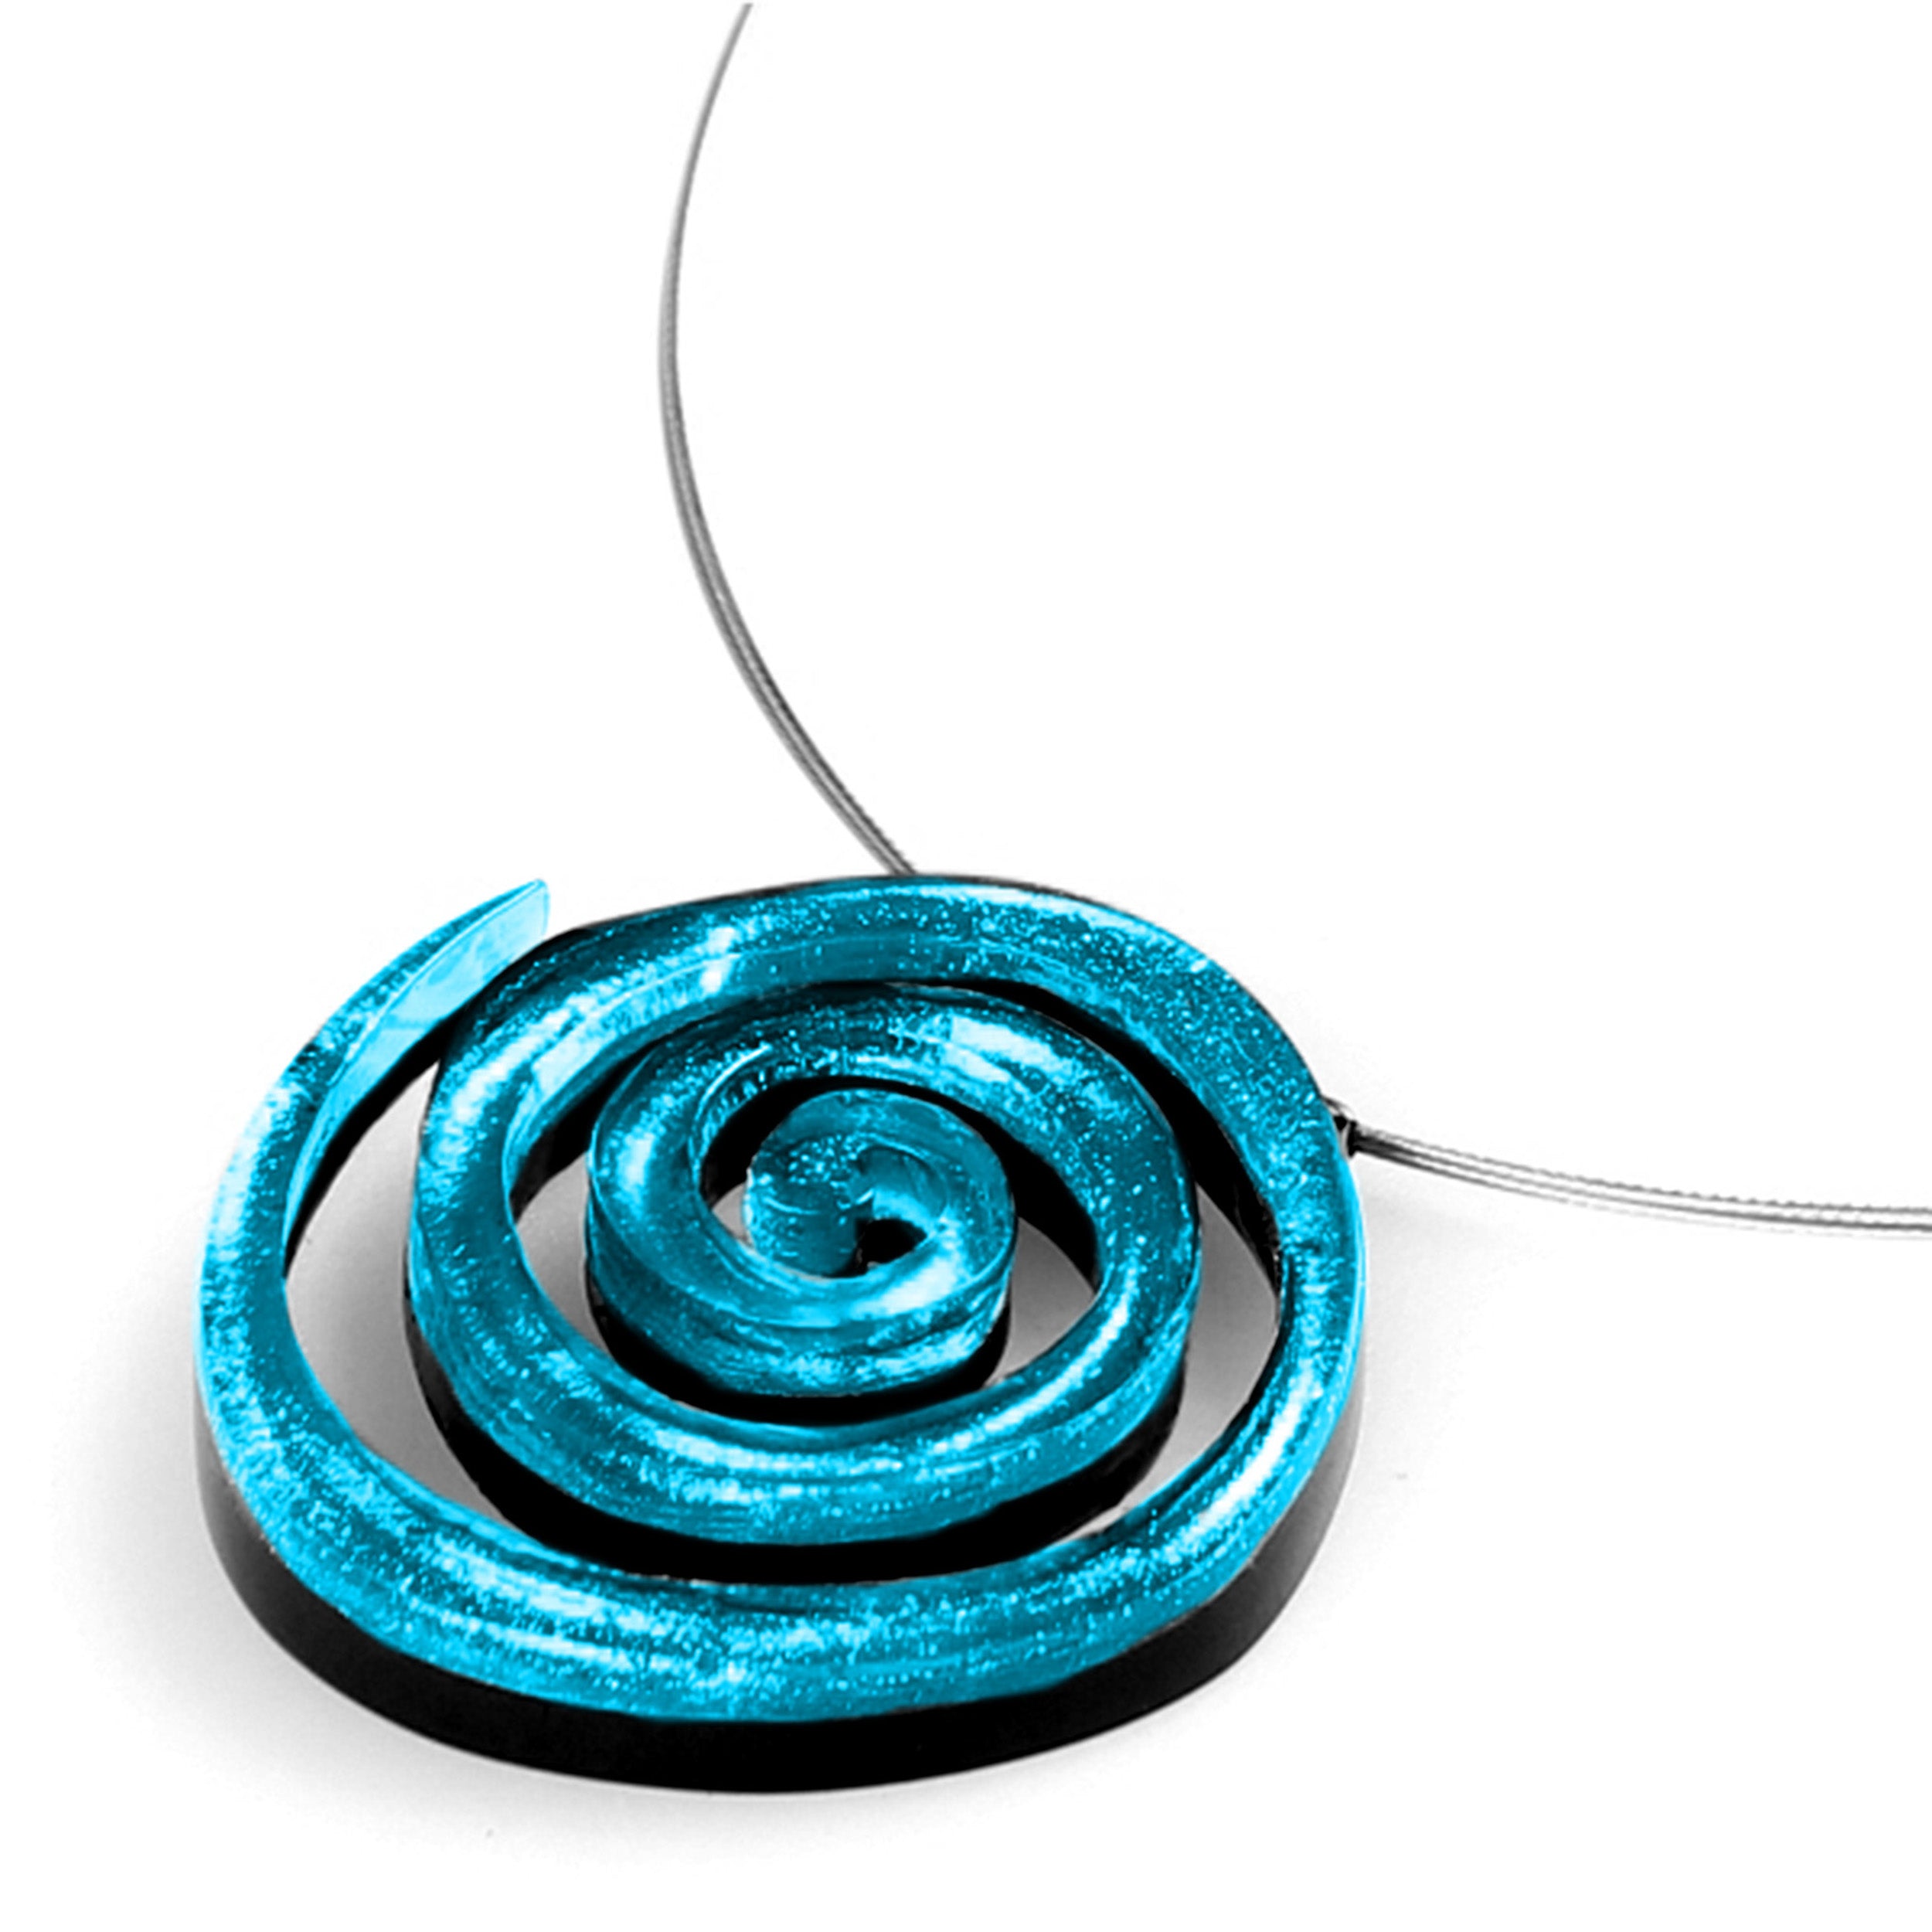 The  Spiral Necklace